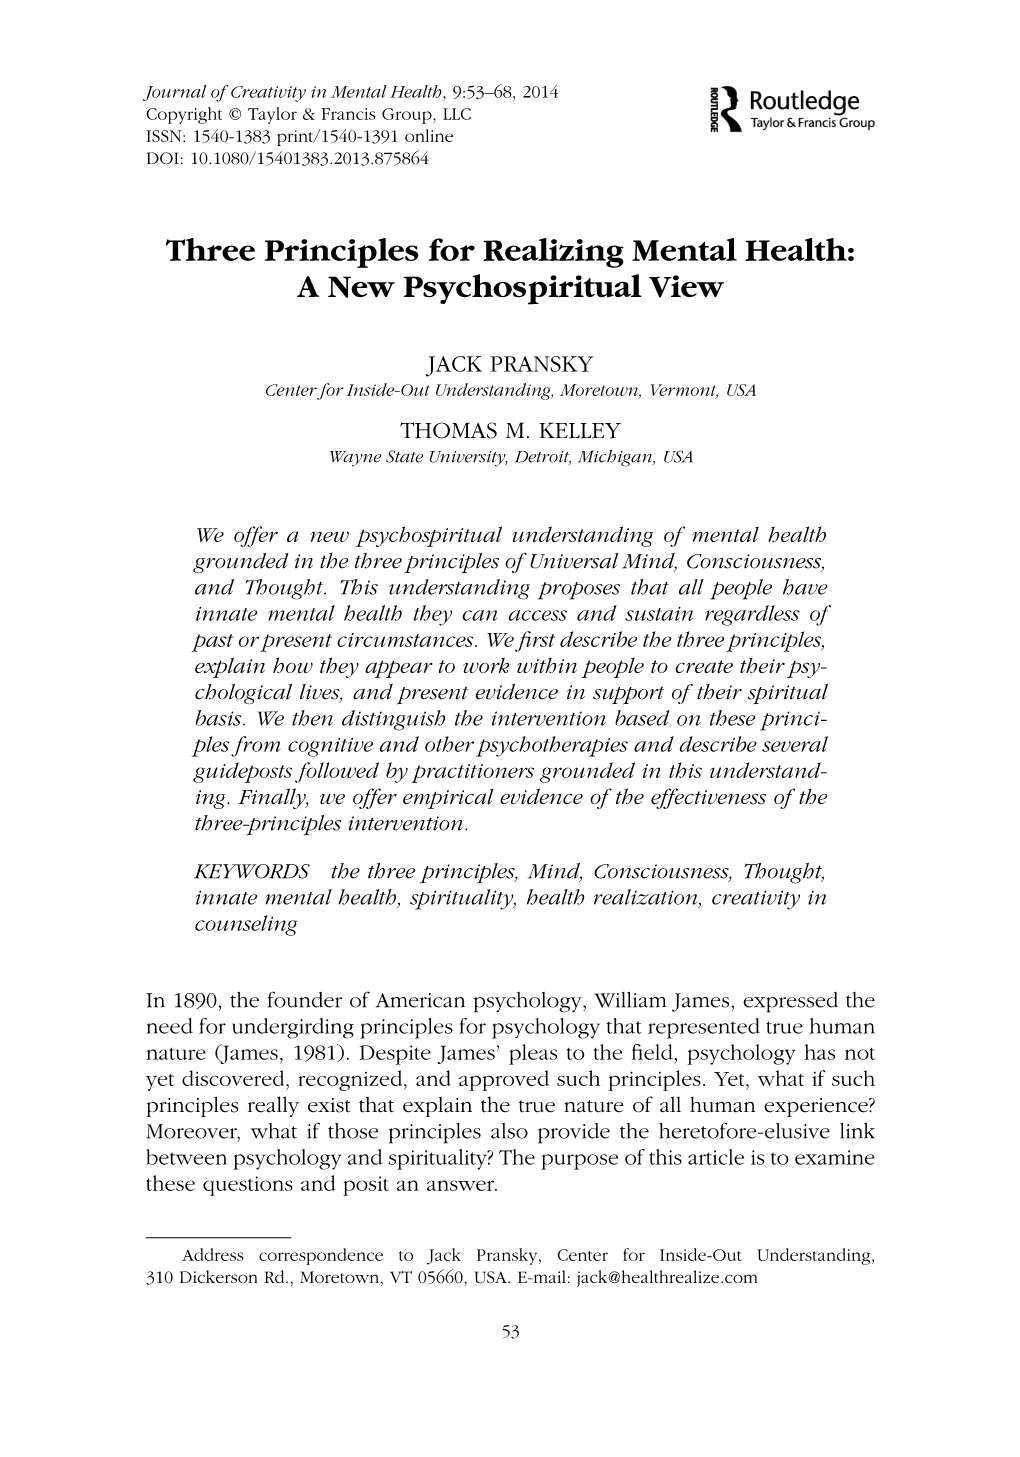 Three Principles for Realizing Mental Health: a New Psychospiritual View